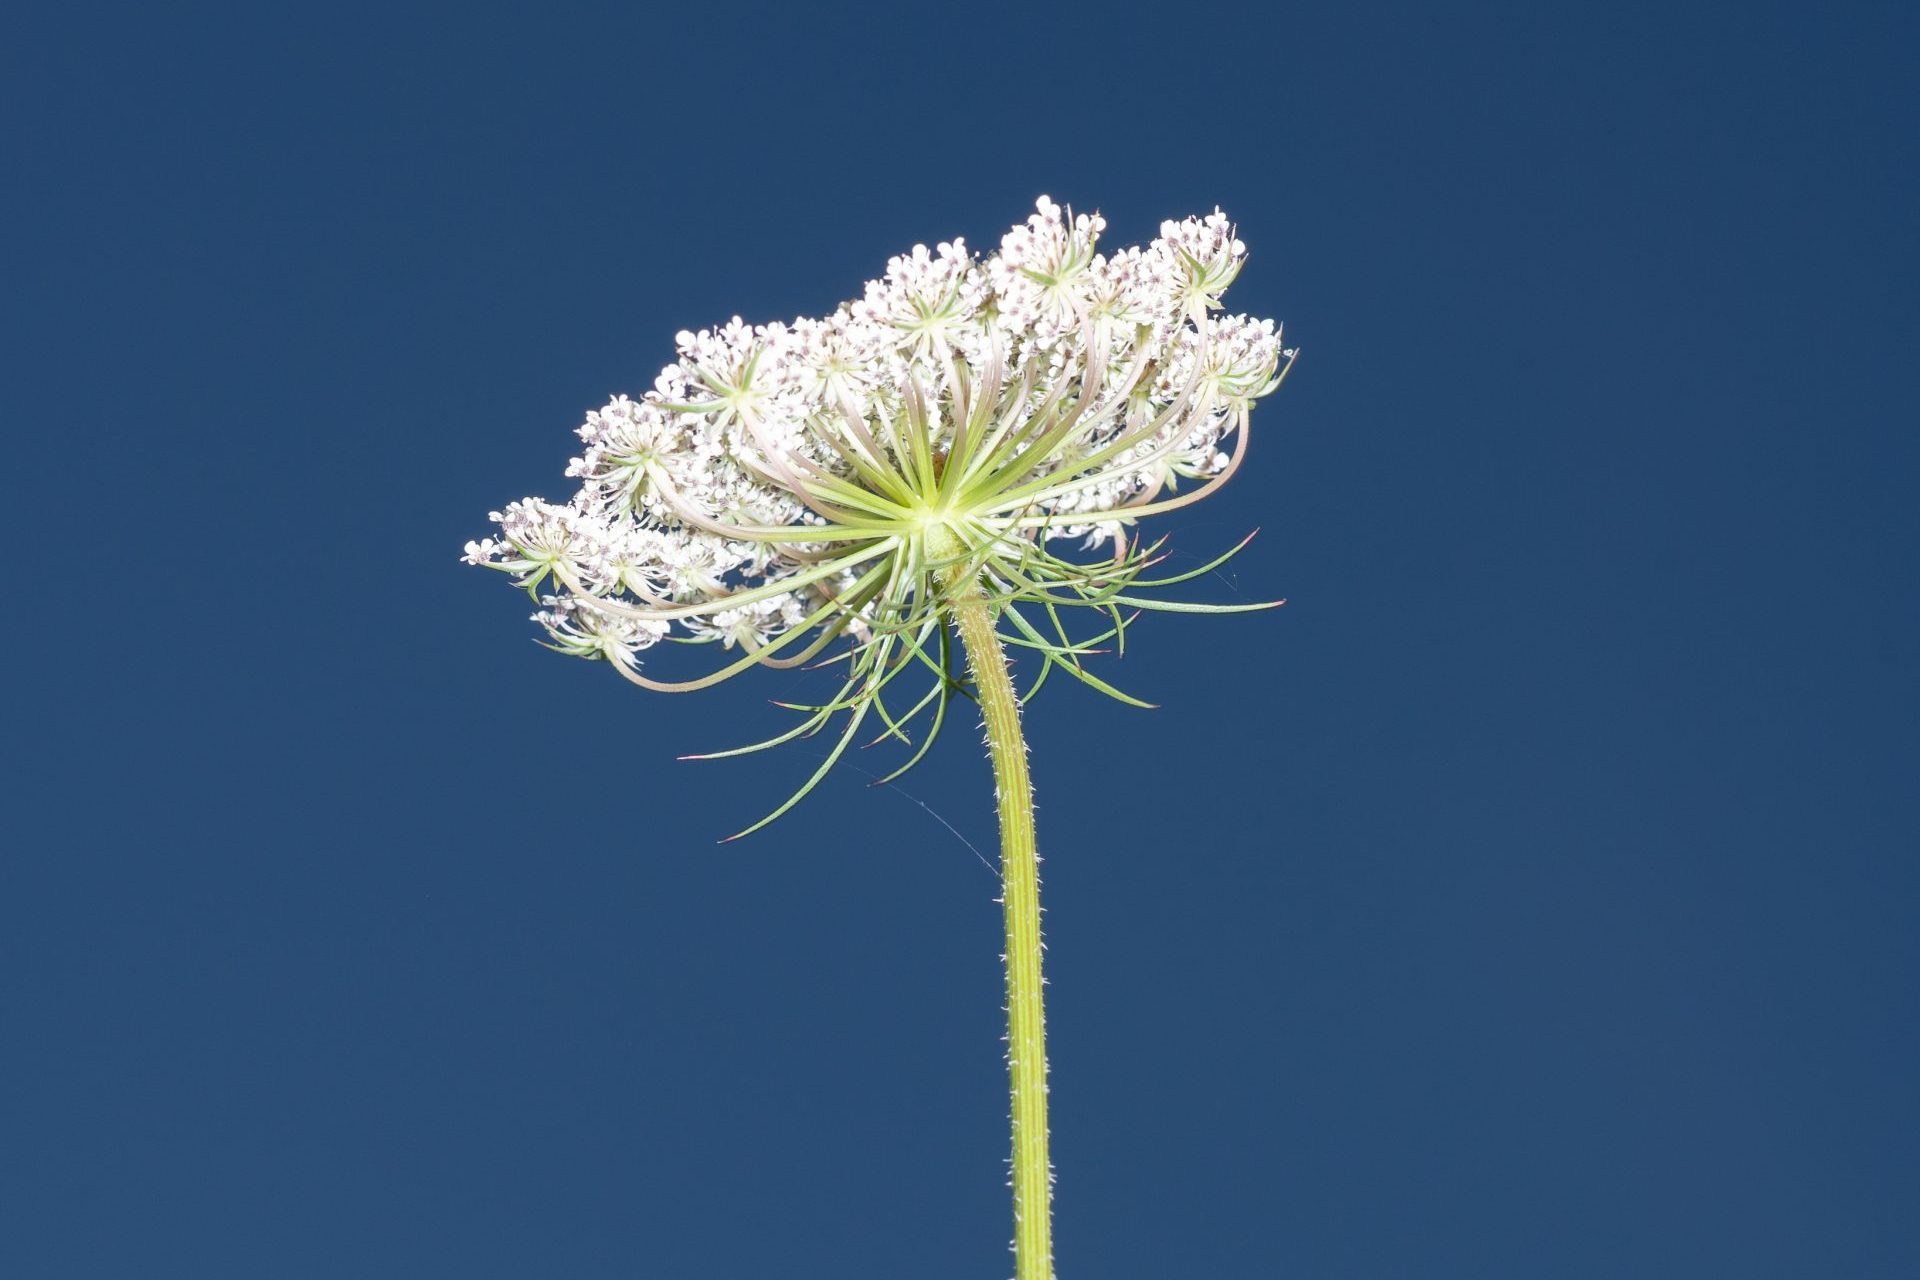 Queen Anne’s lace flower against sky